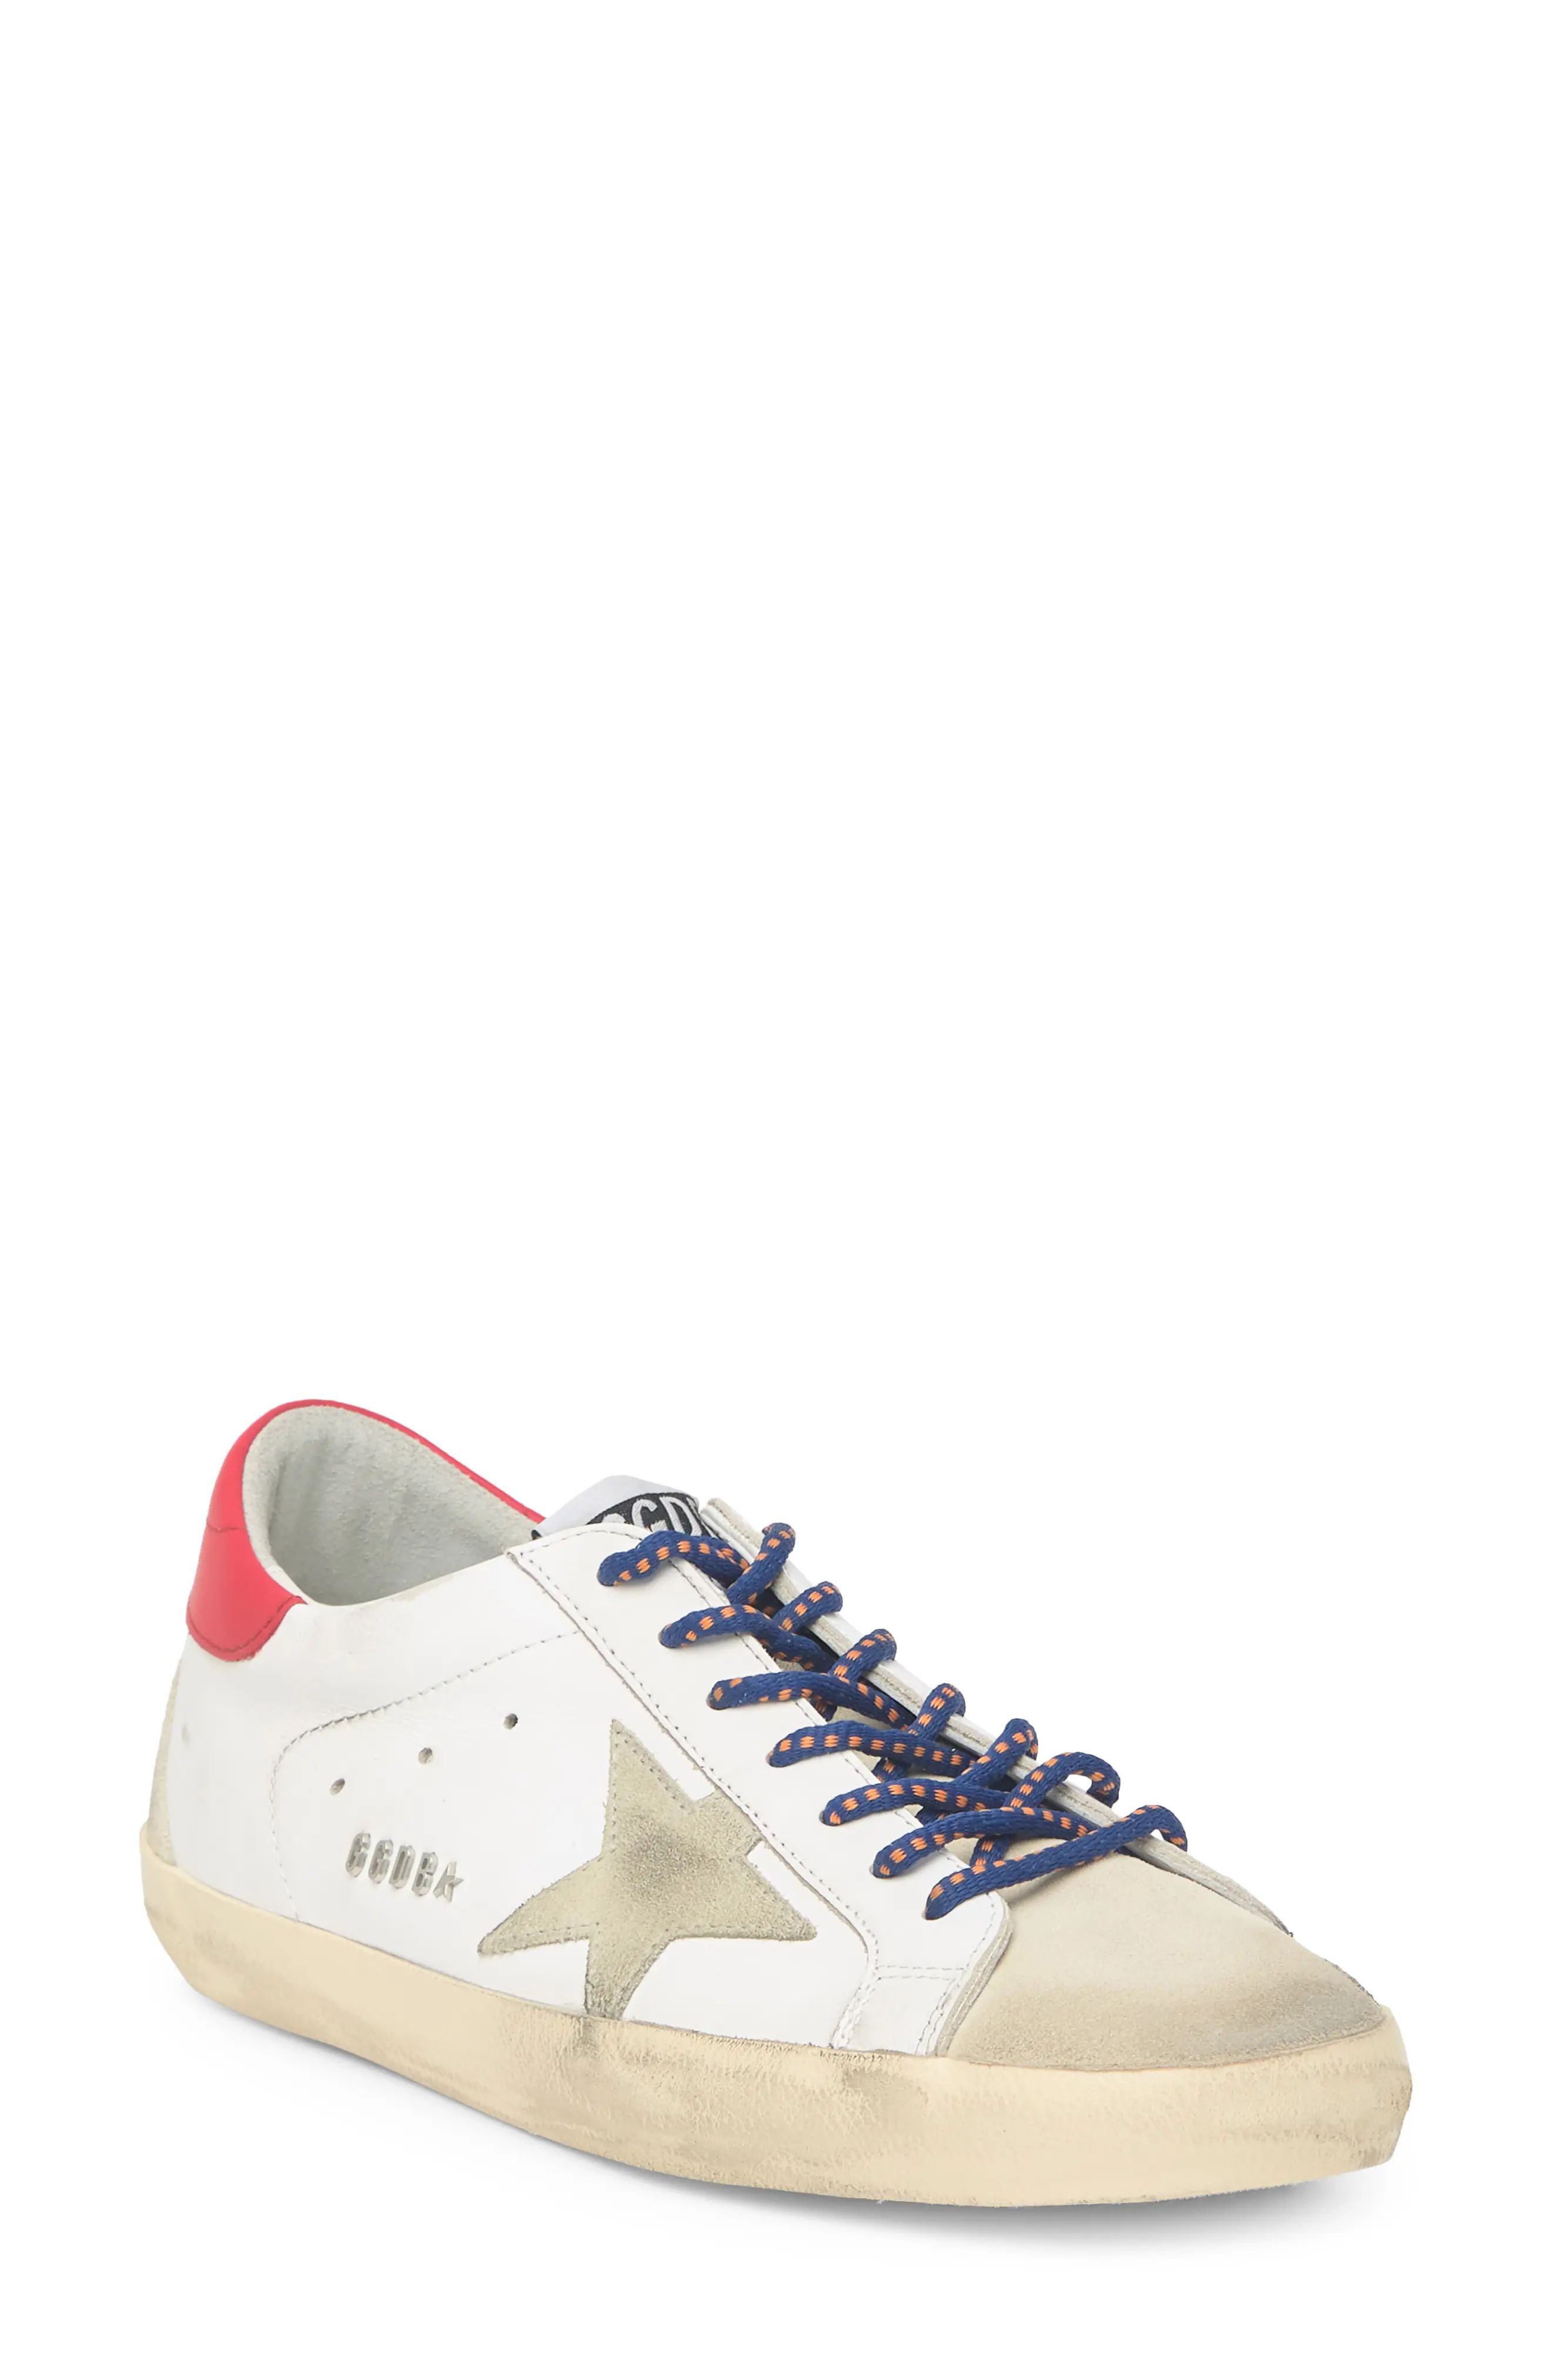 Golden Goose Super-Star Low Top Sneaker, Size 7Us in White/Ice/Seed Pearl/red at Nordstrom | Nordstrom